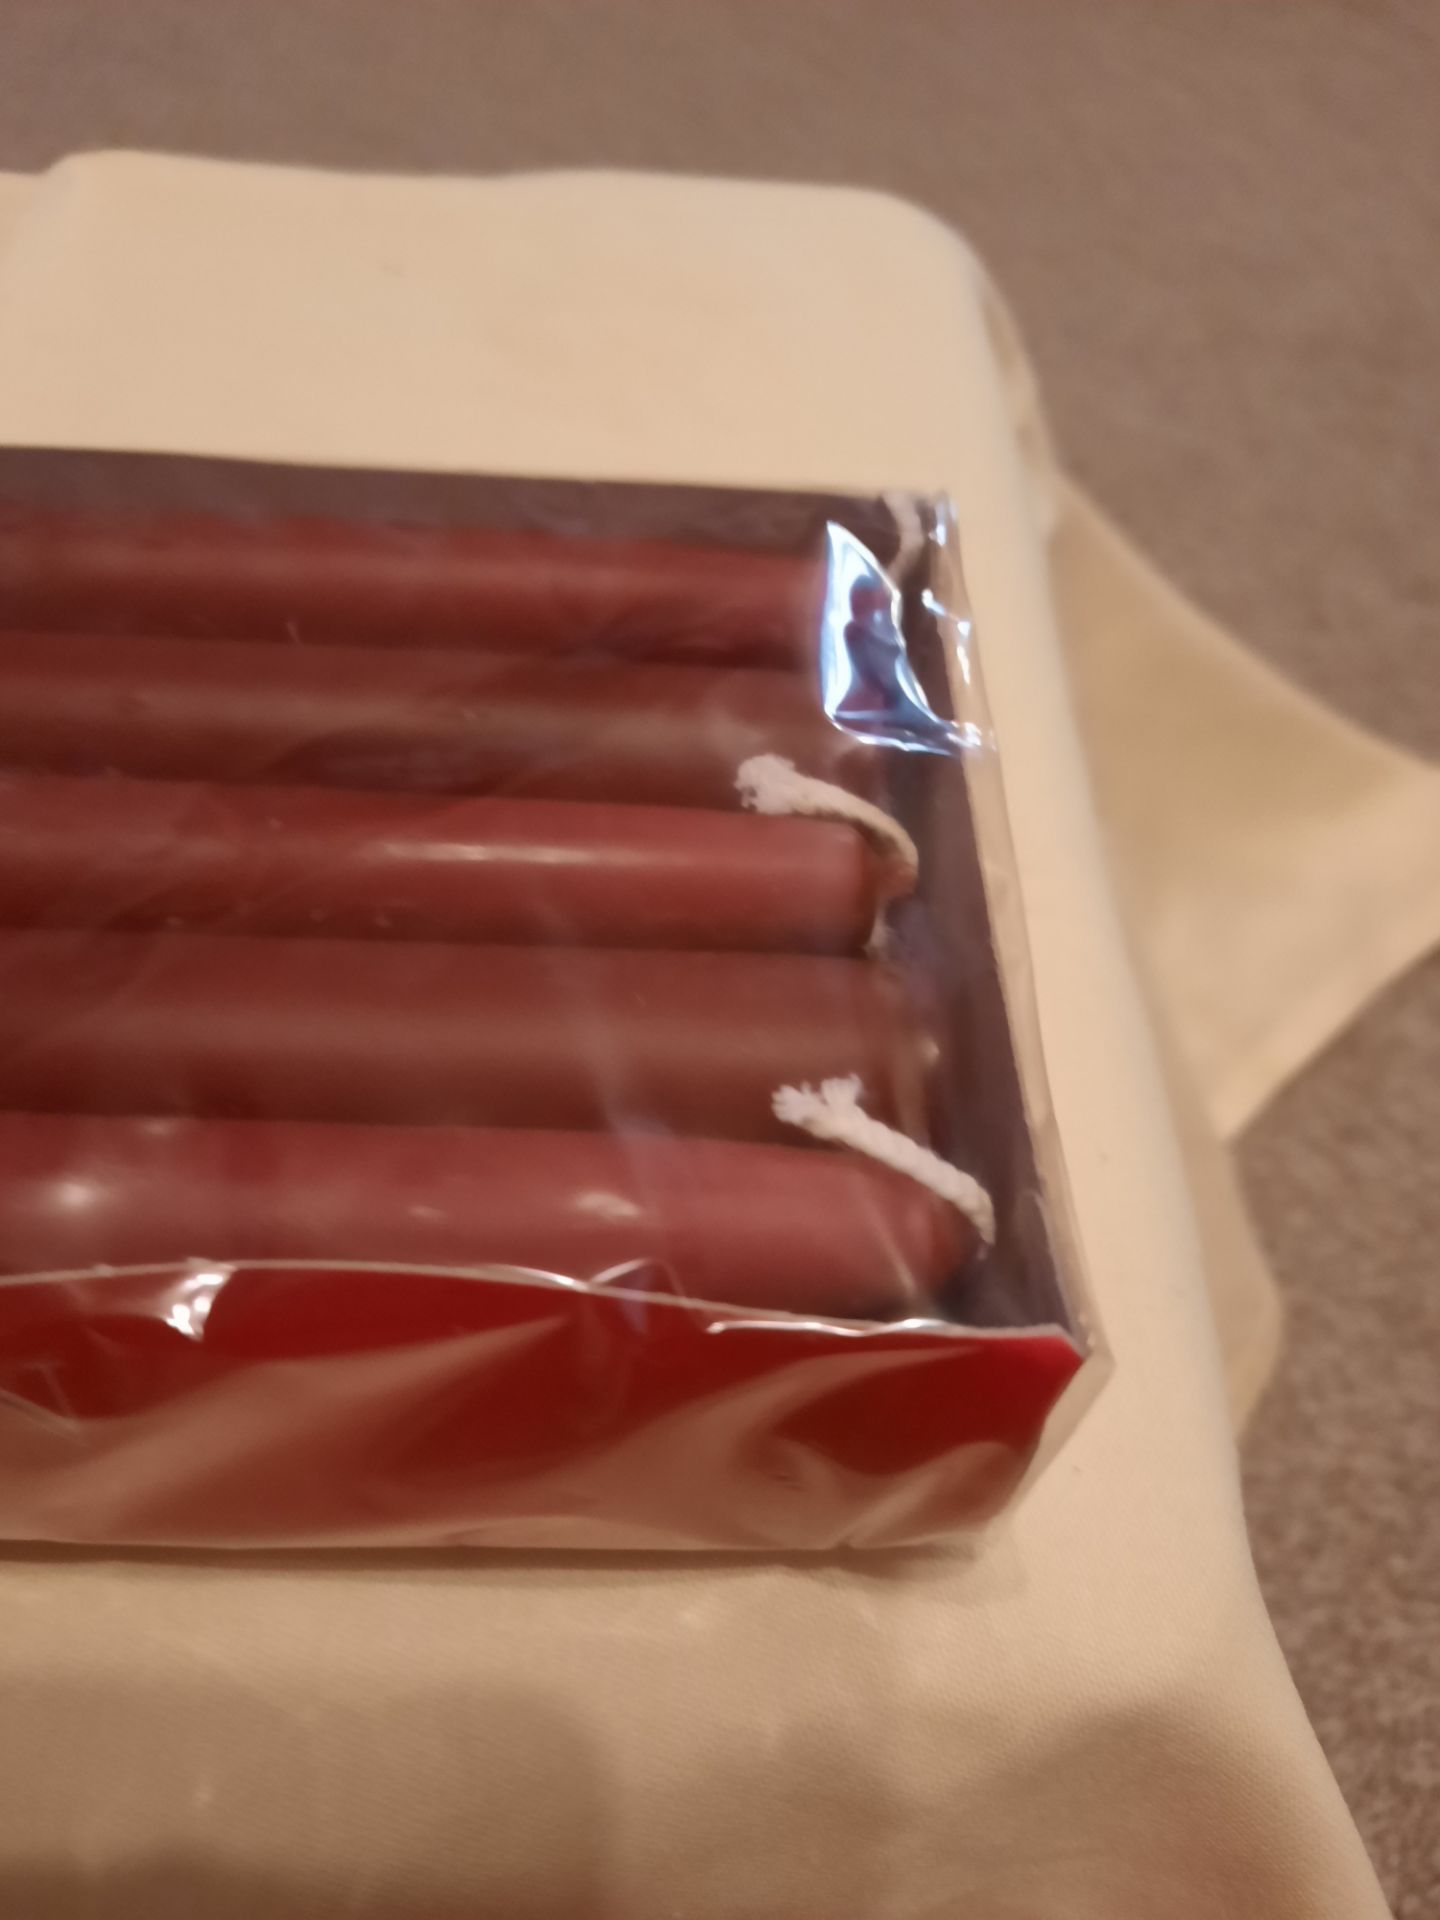 4 Packs Burgundy Wine Candles - Image 3 of 3